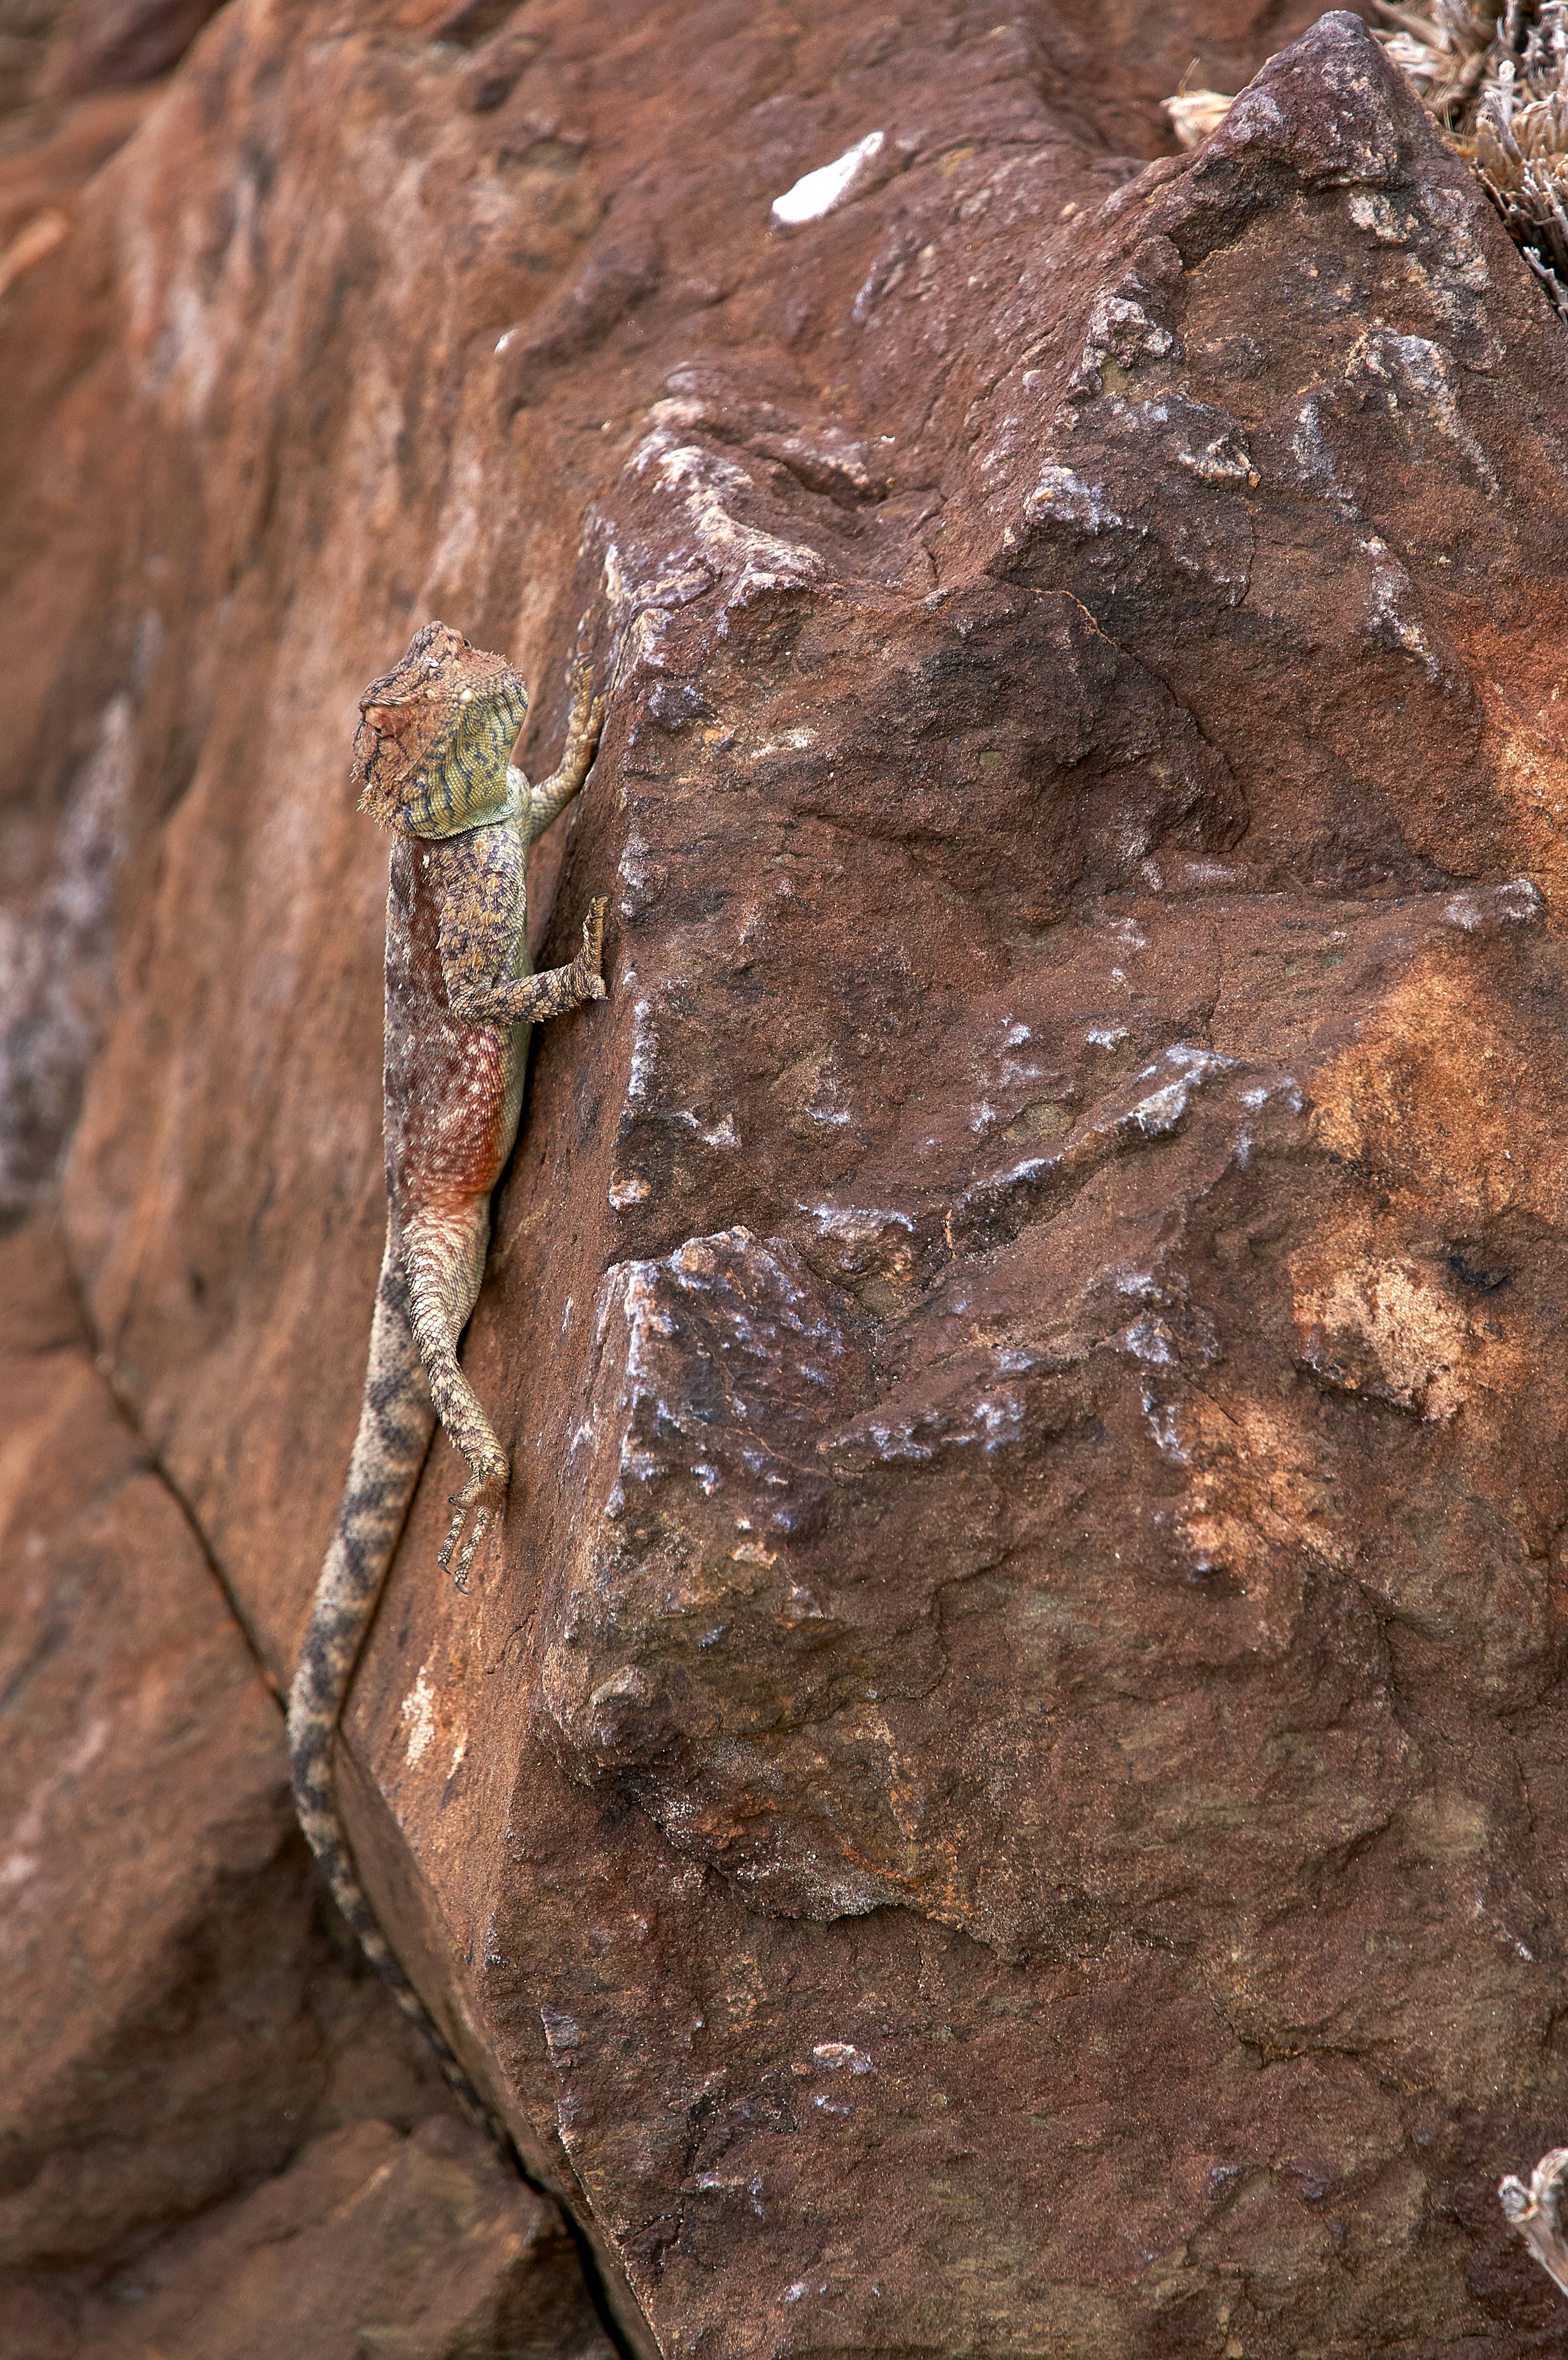 gray and green lizard on stone